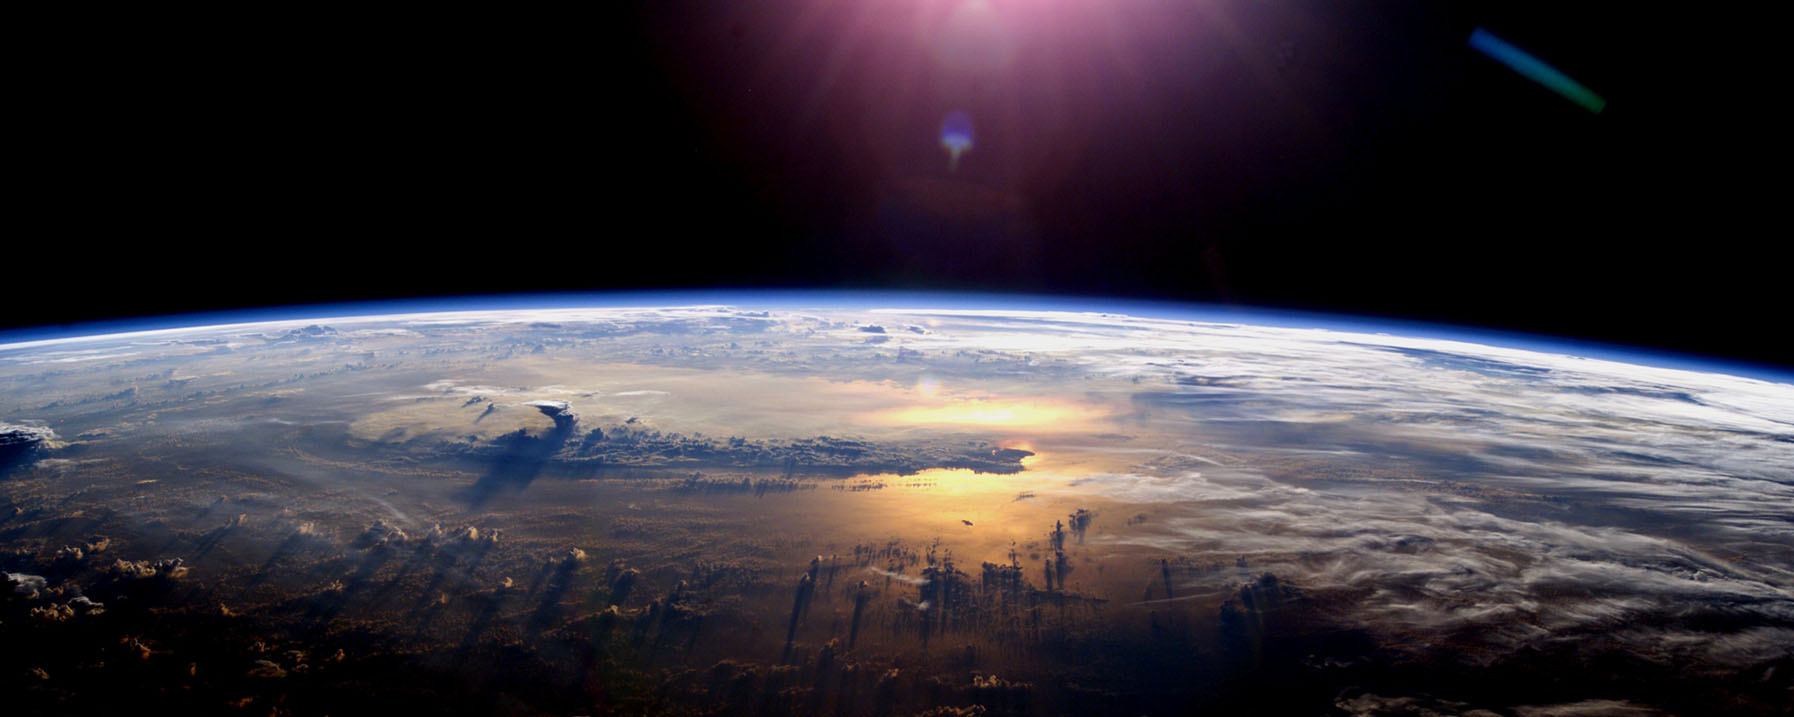 Sun's Partial Reflection on the Earth